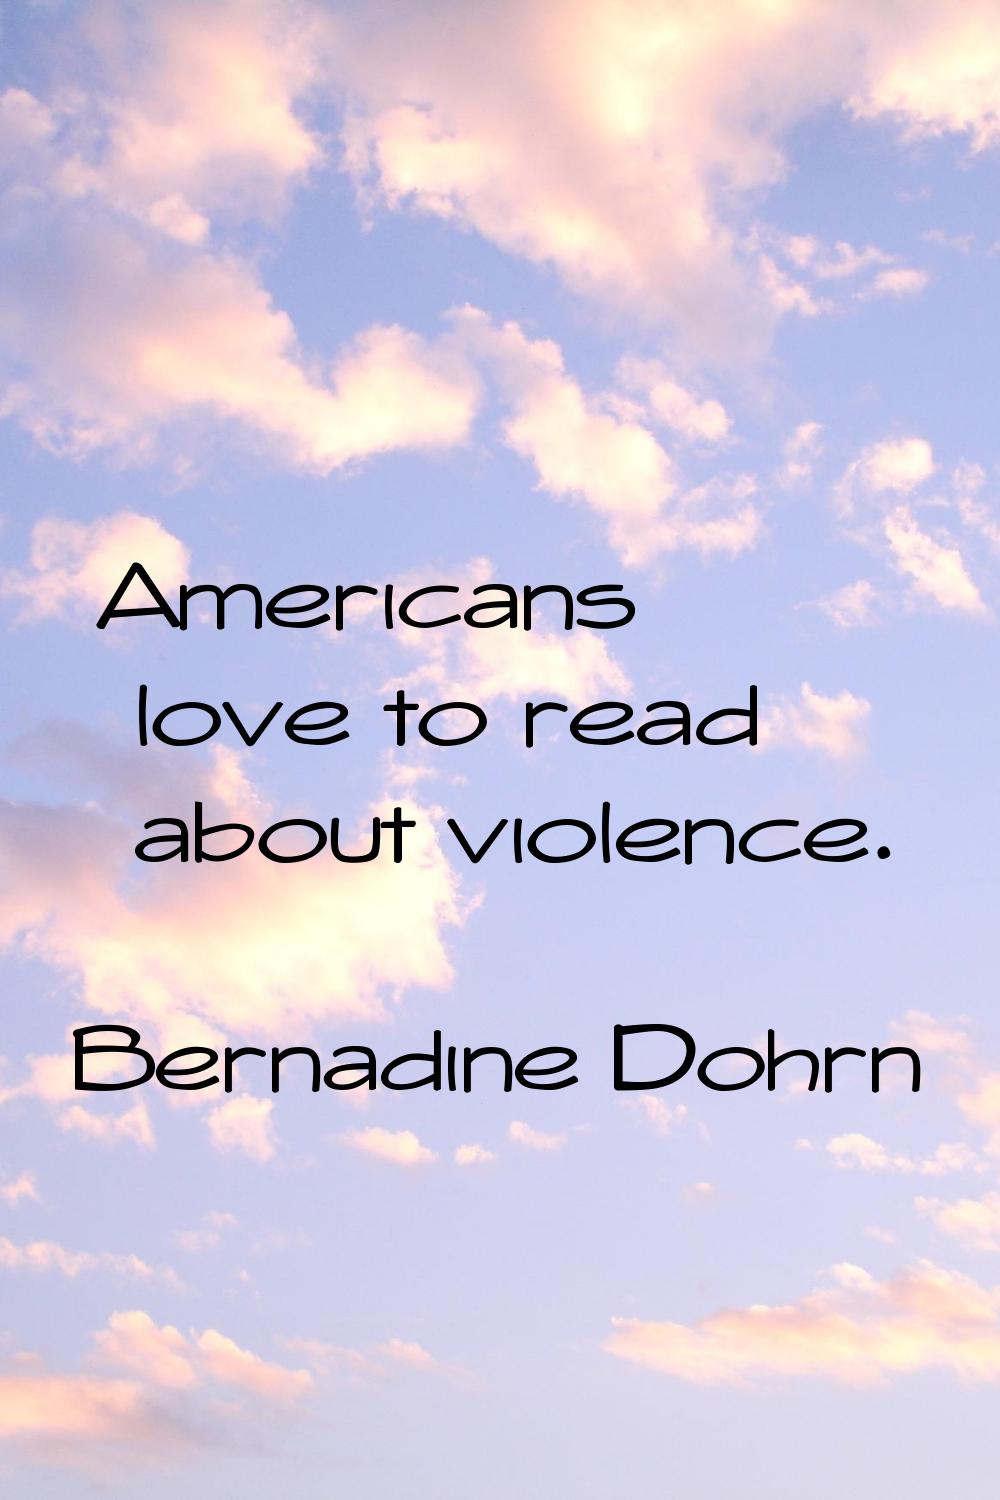 Americans love to read about violence.